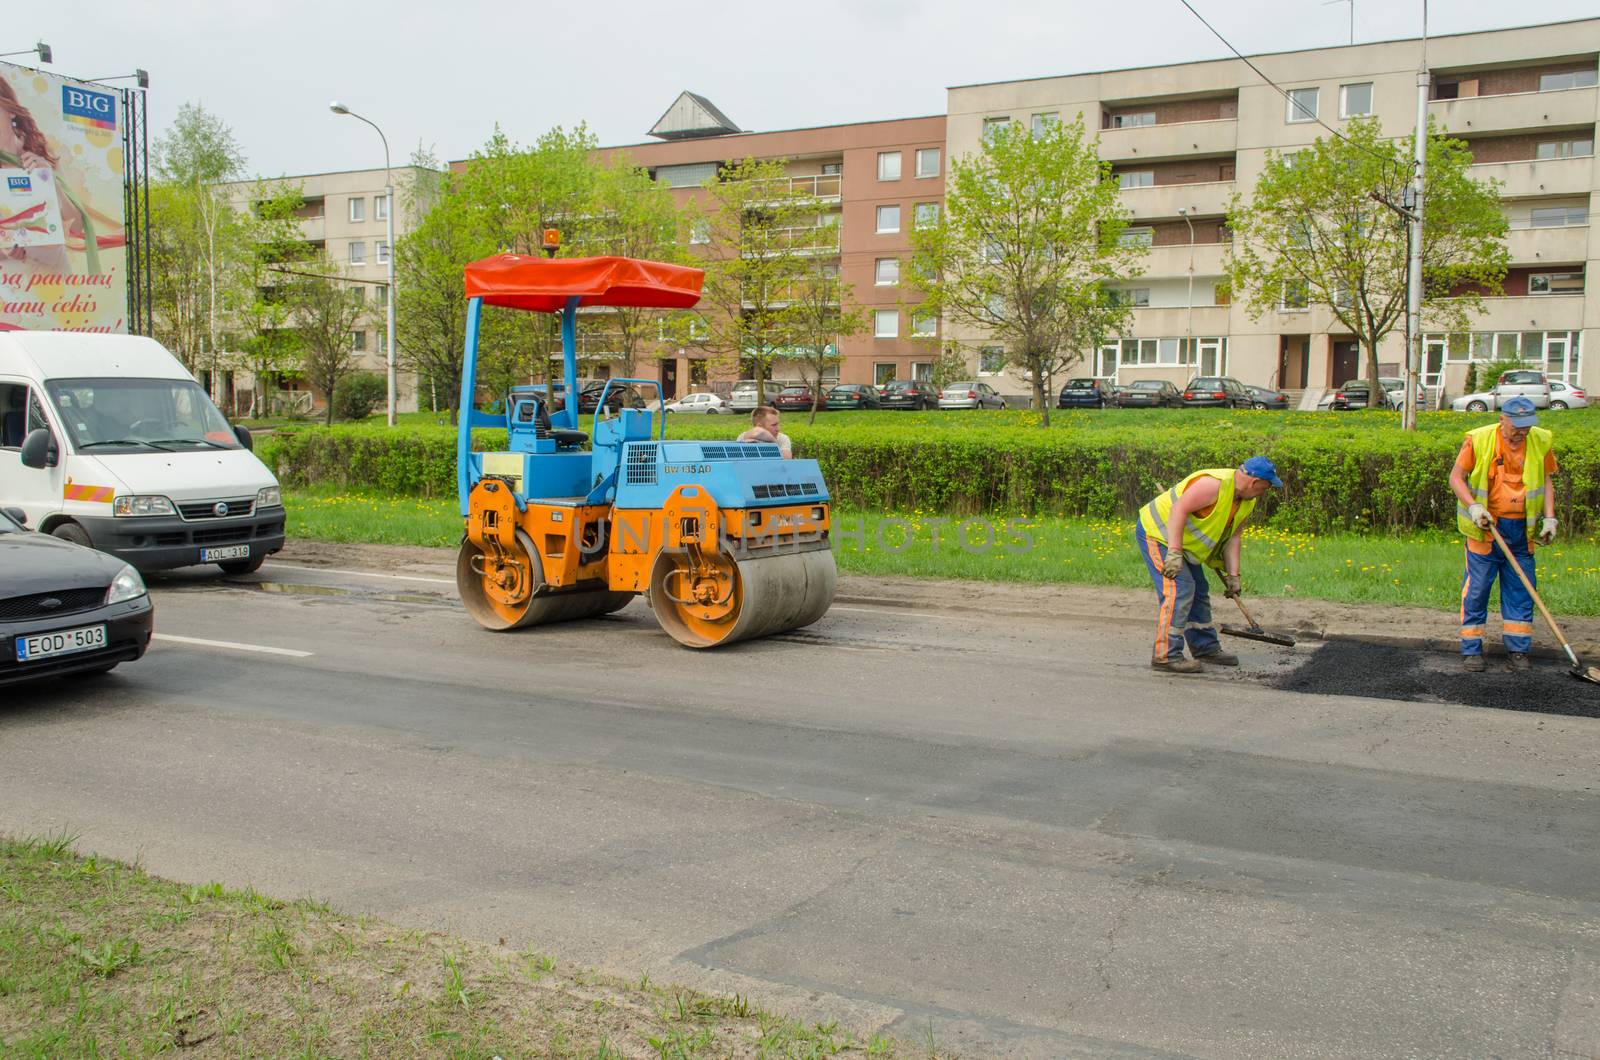 VILNIUS, LITHUANIA - MAY 11: road roller and asphalt paving machine at construction site street on May 11, 2013 in Vilnius.